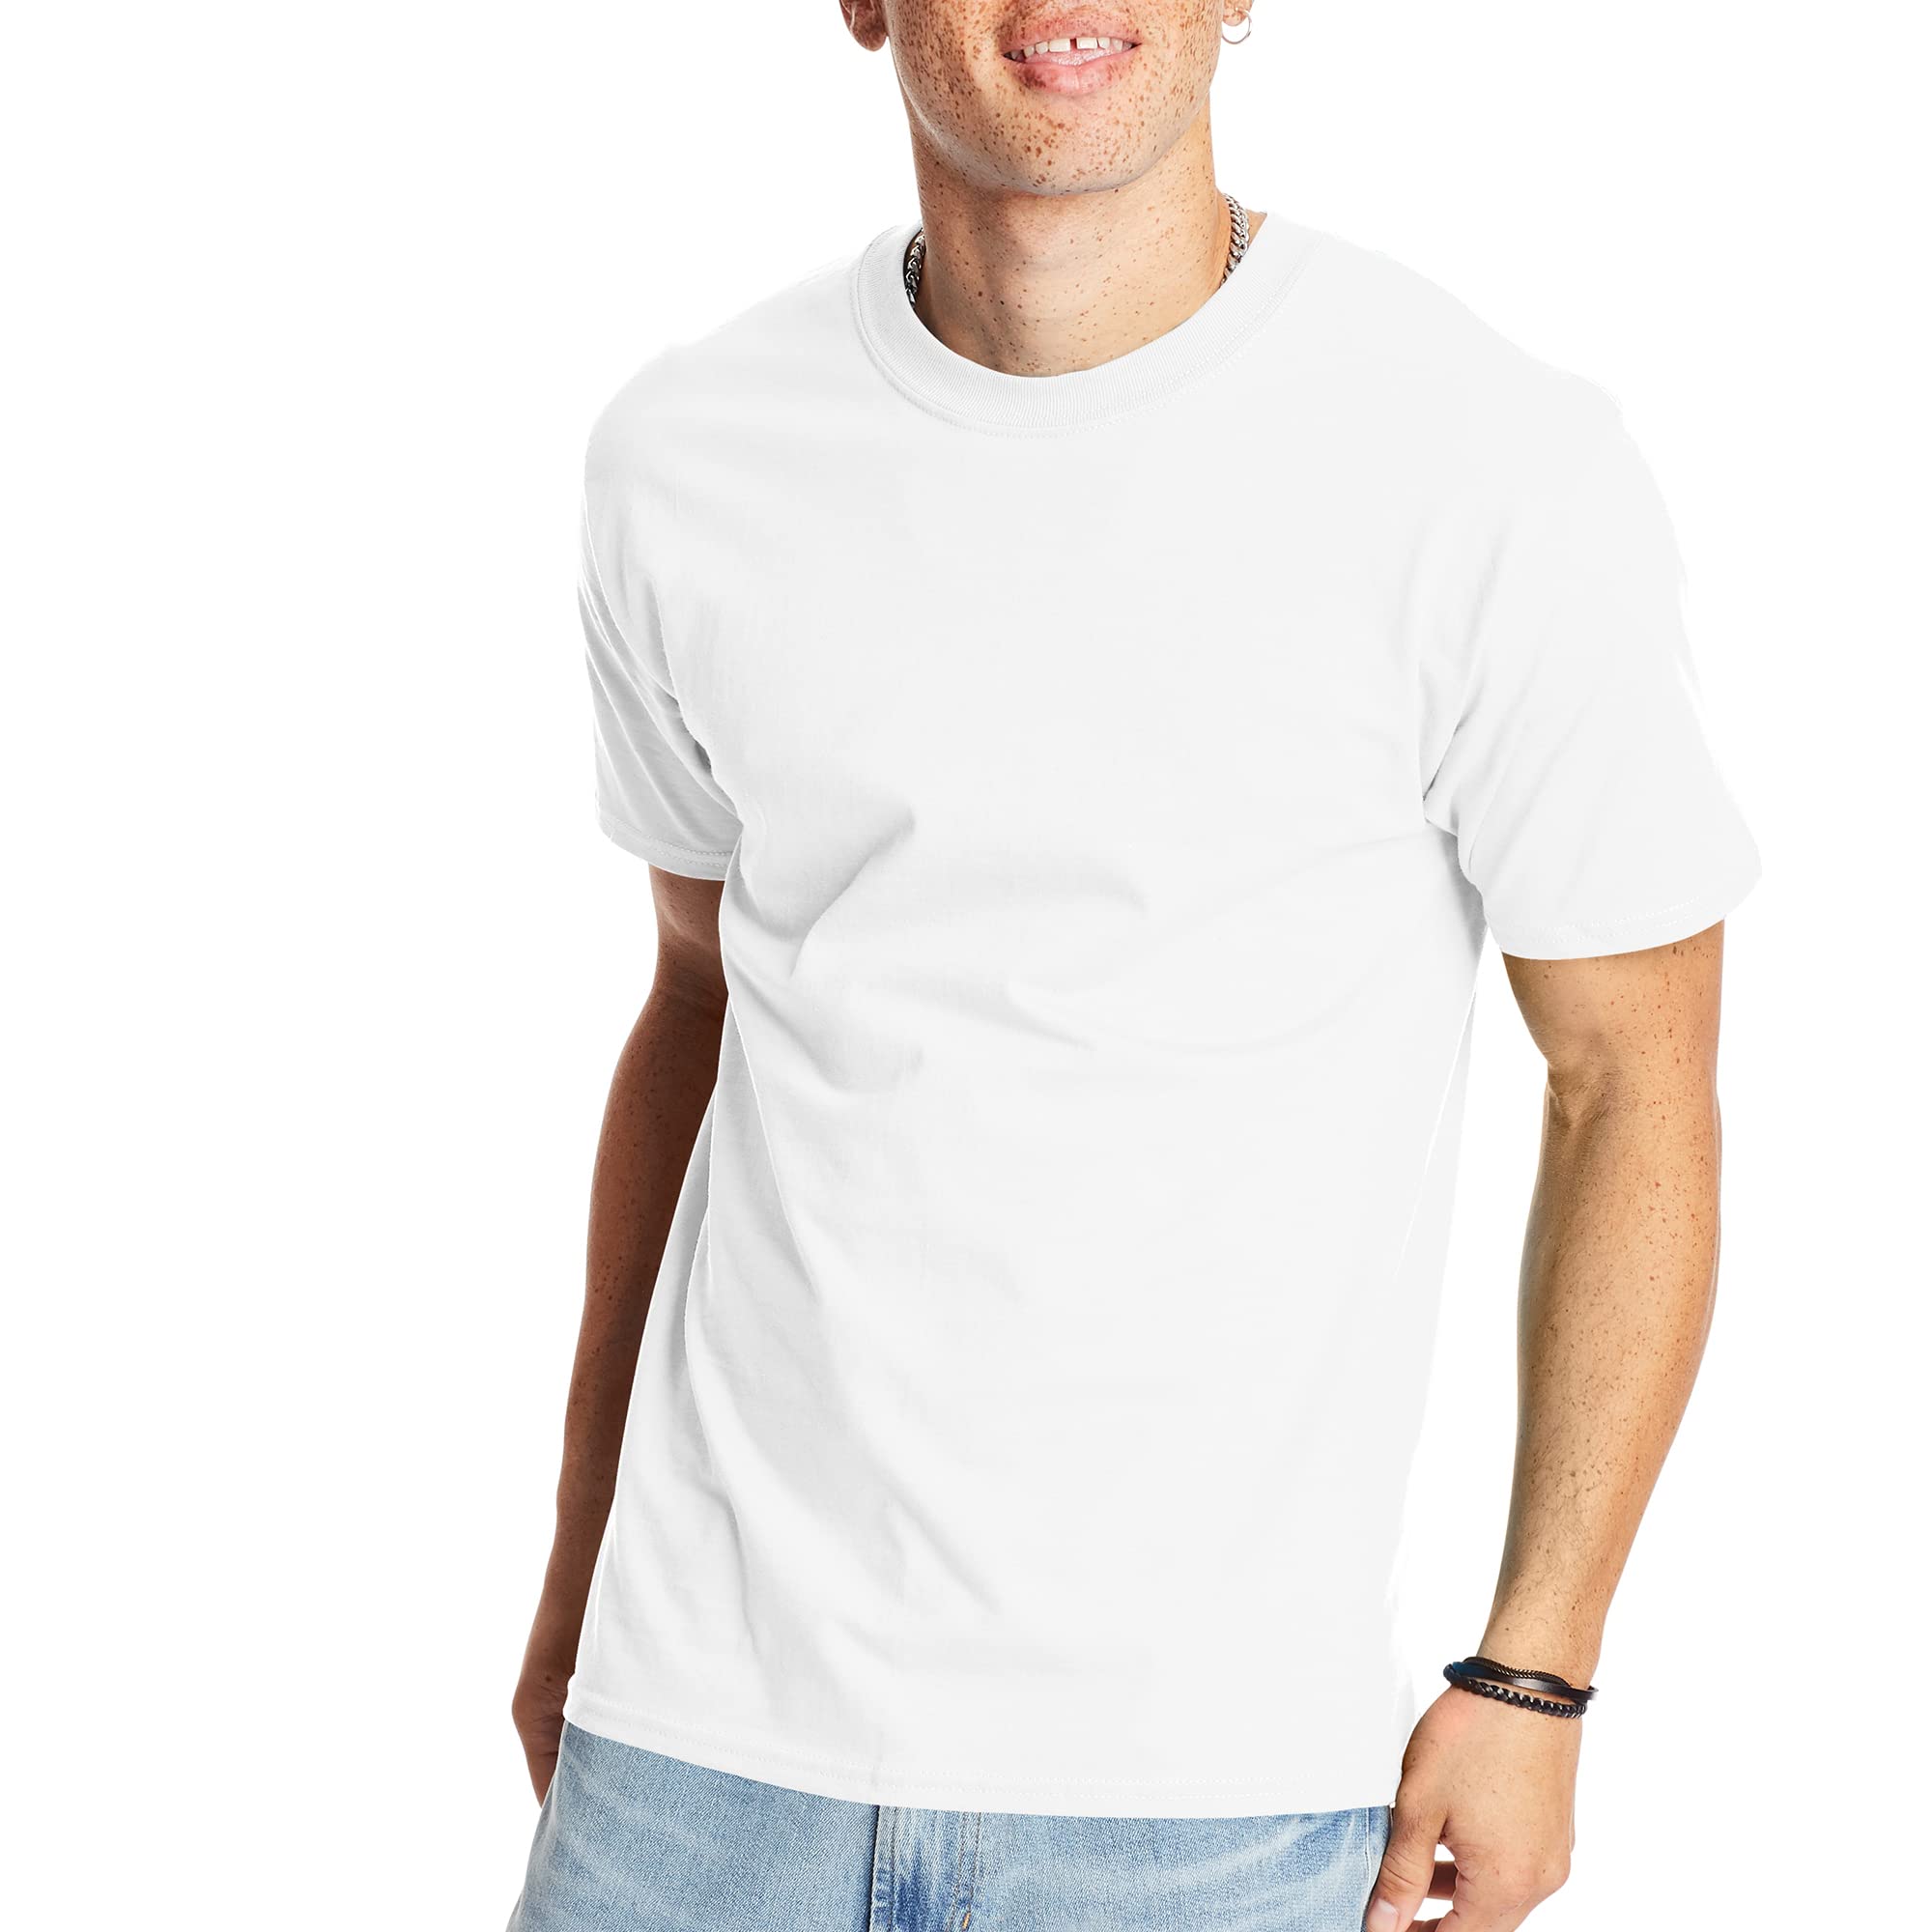 Hanes mens Beefyt T-shirt, Heavyweight Cotton Crewneck Tee, 1 Or 2 Pack, Available in Tall Sizes - $7.00